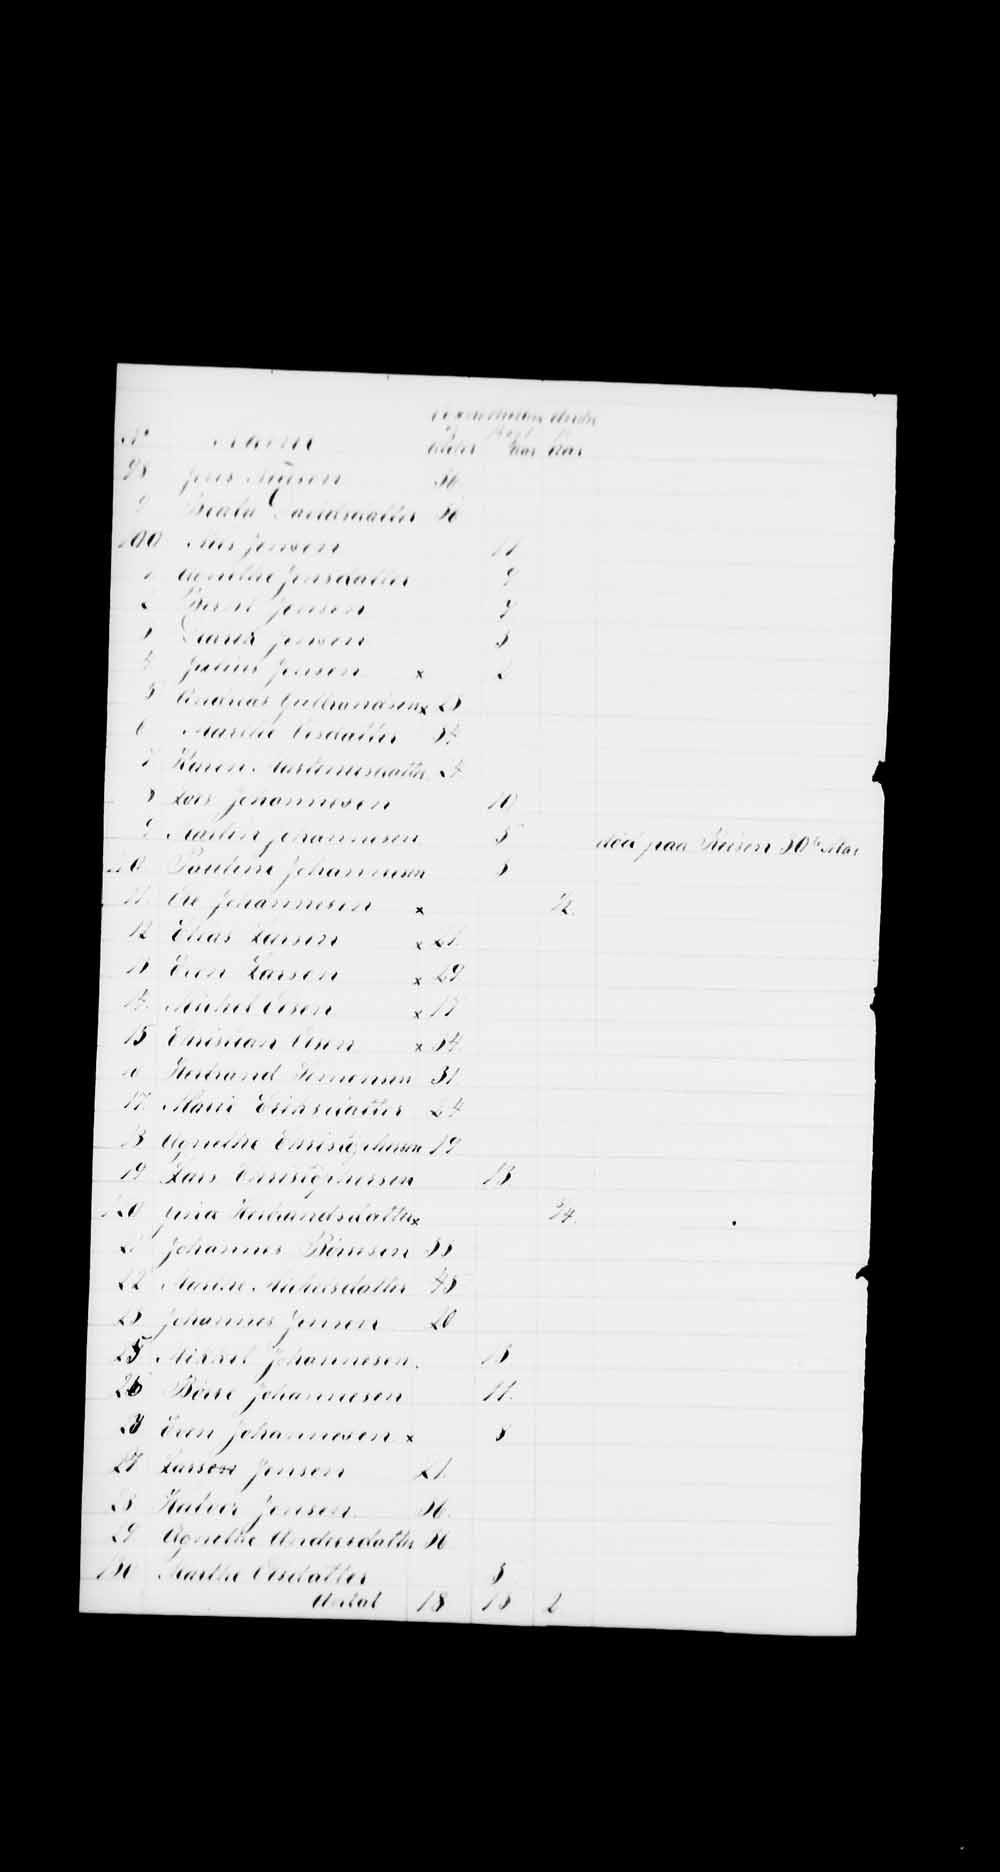 Digitized page of Passenger Lists for Image No.: e003530330